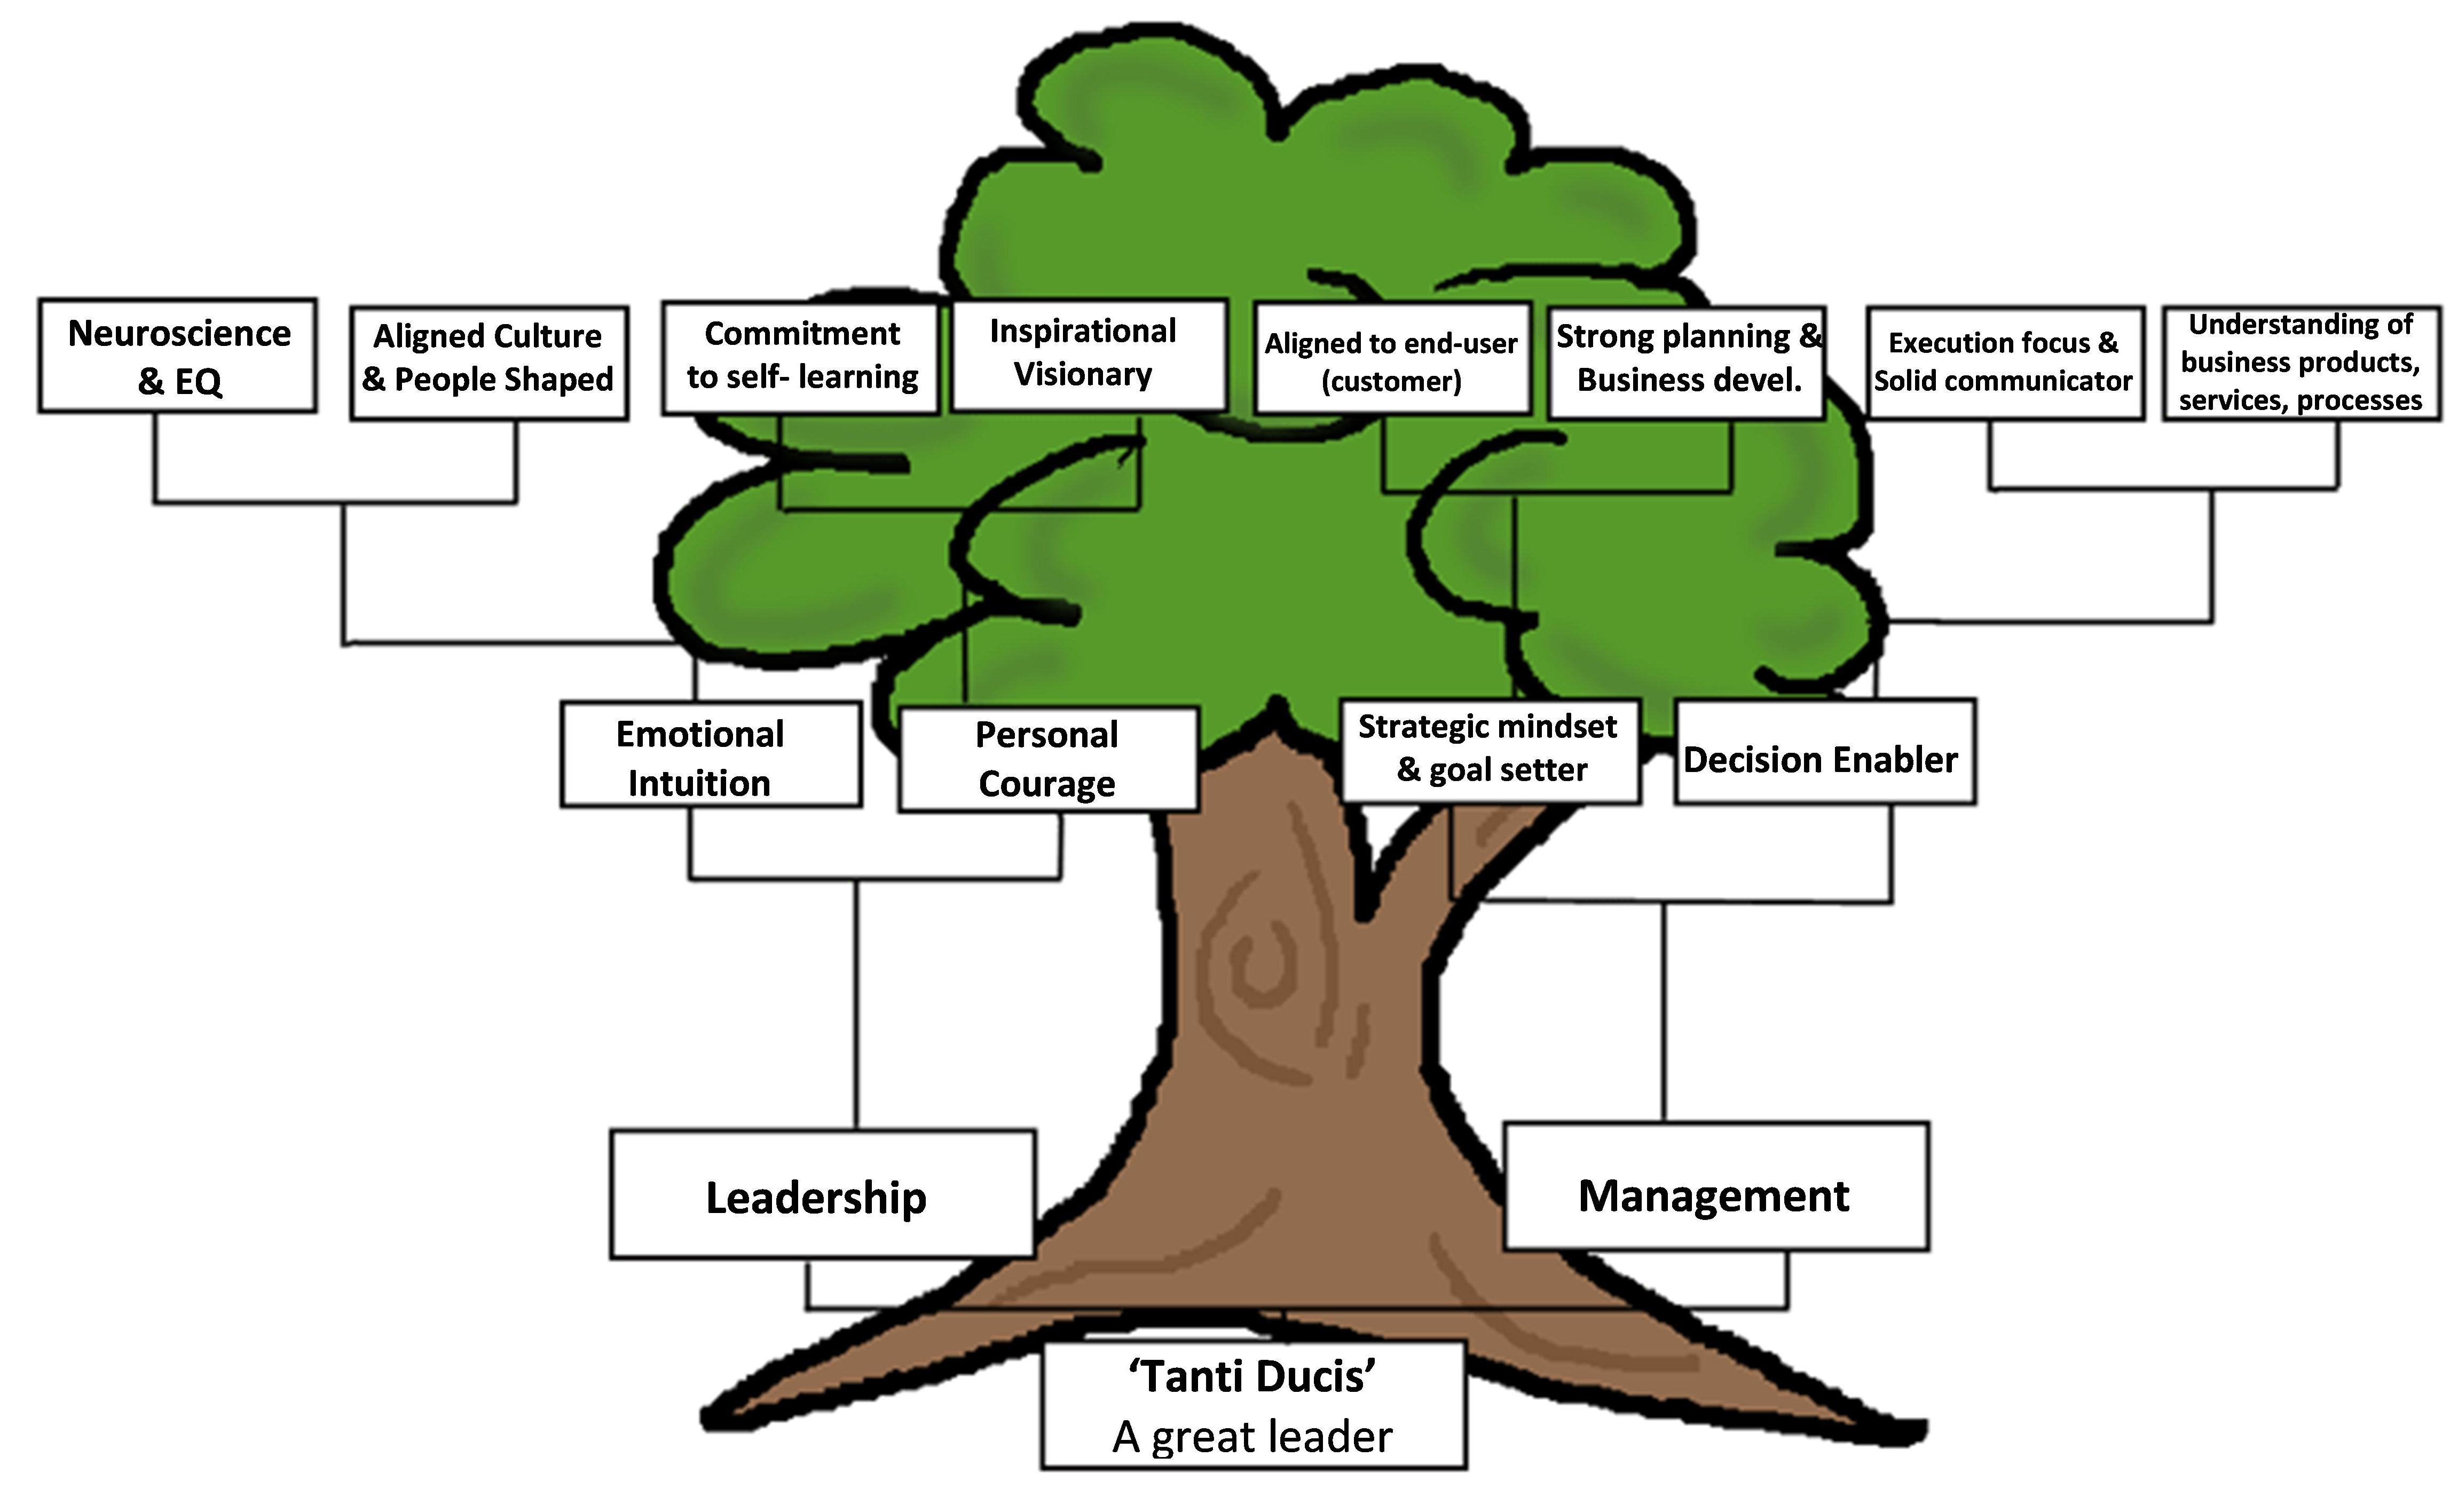 ... family tree resembles nothing more than a twig with a few leaves on it